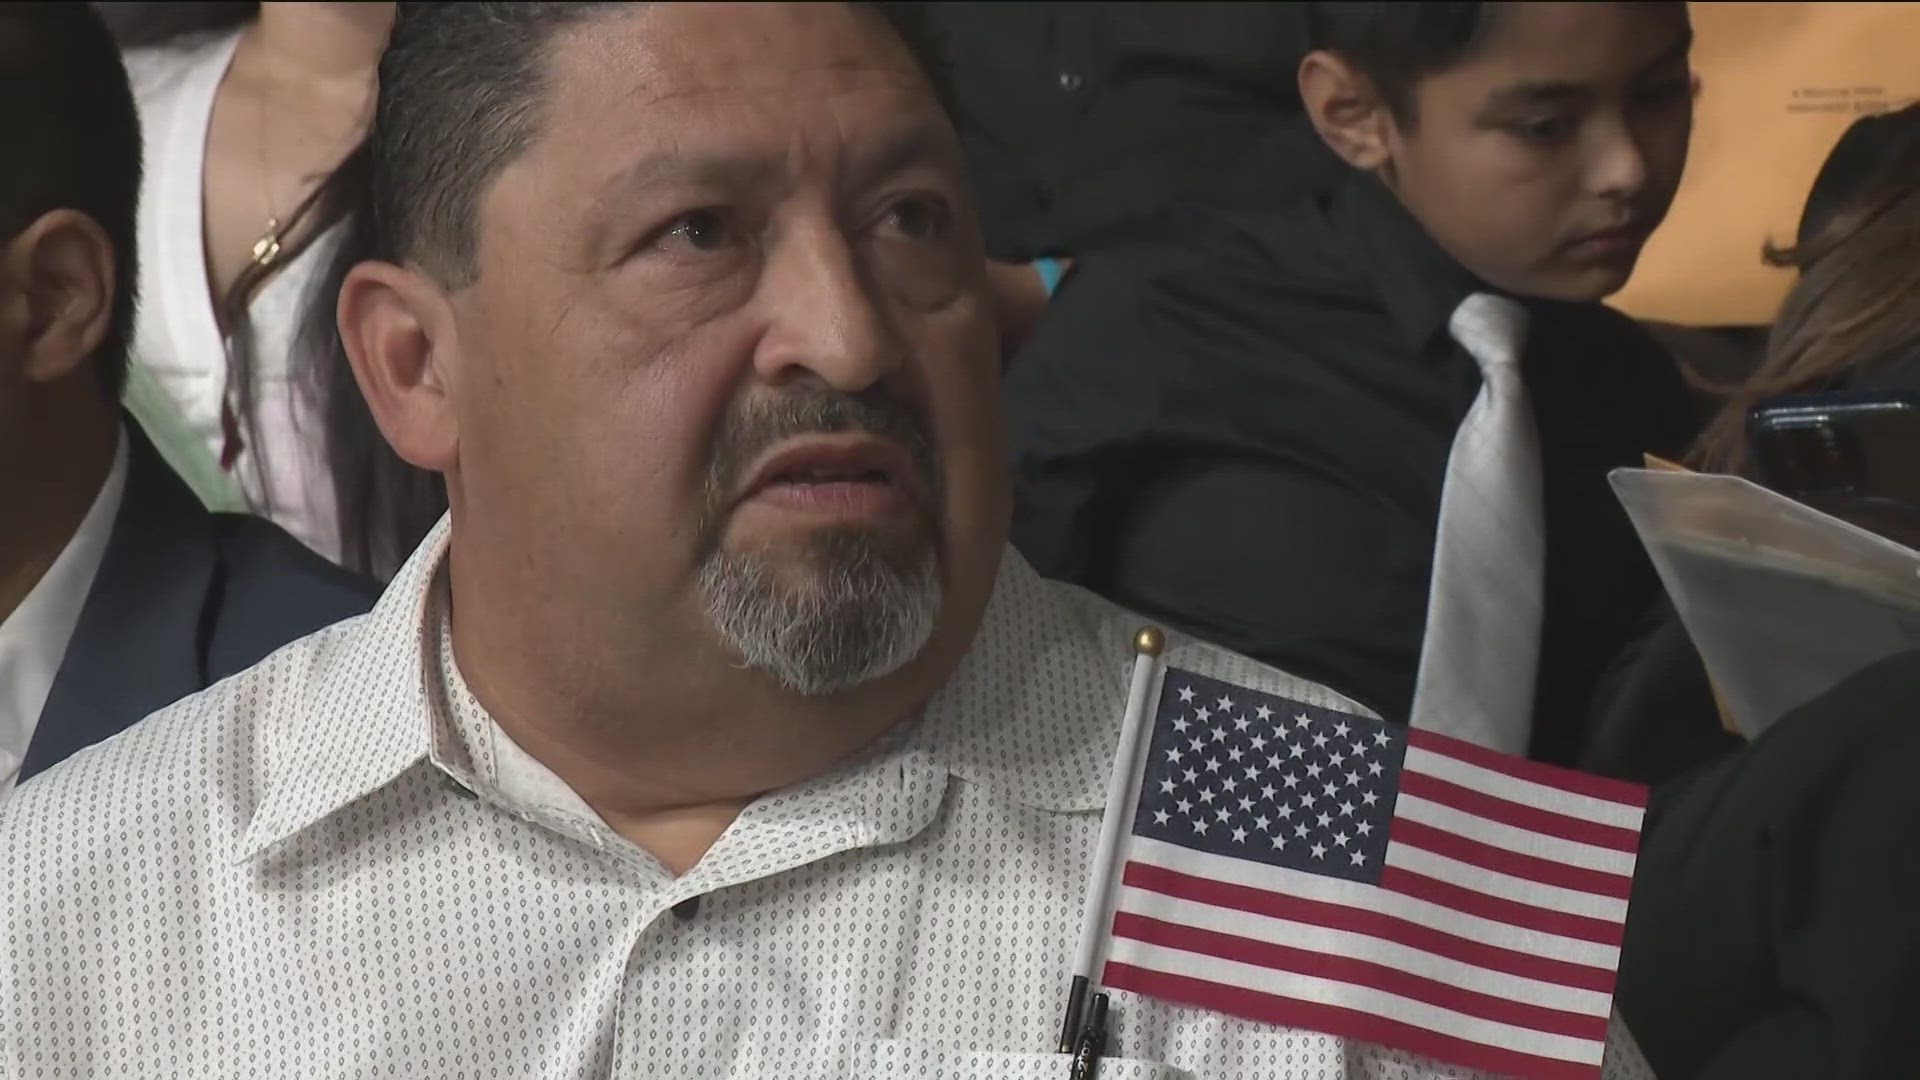 One man shared his opinions on Senate Bill 4 during a naturalization ceremony Wednesday in the Houston area.